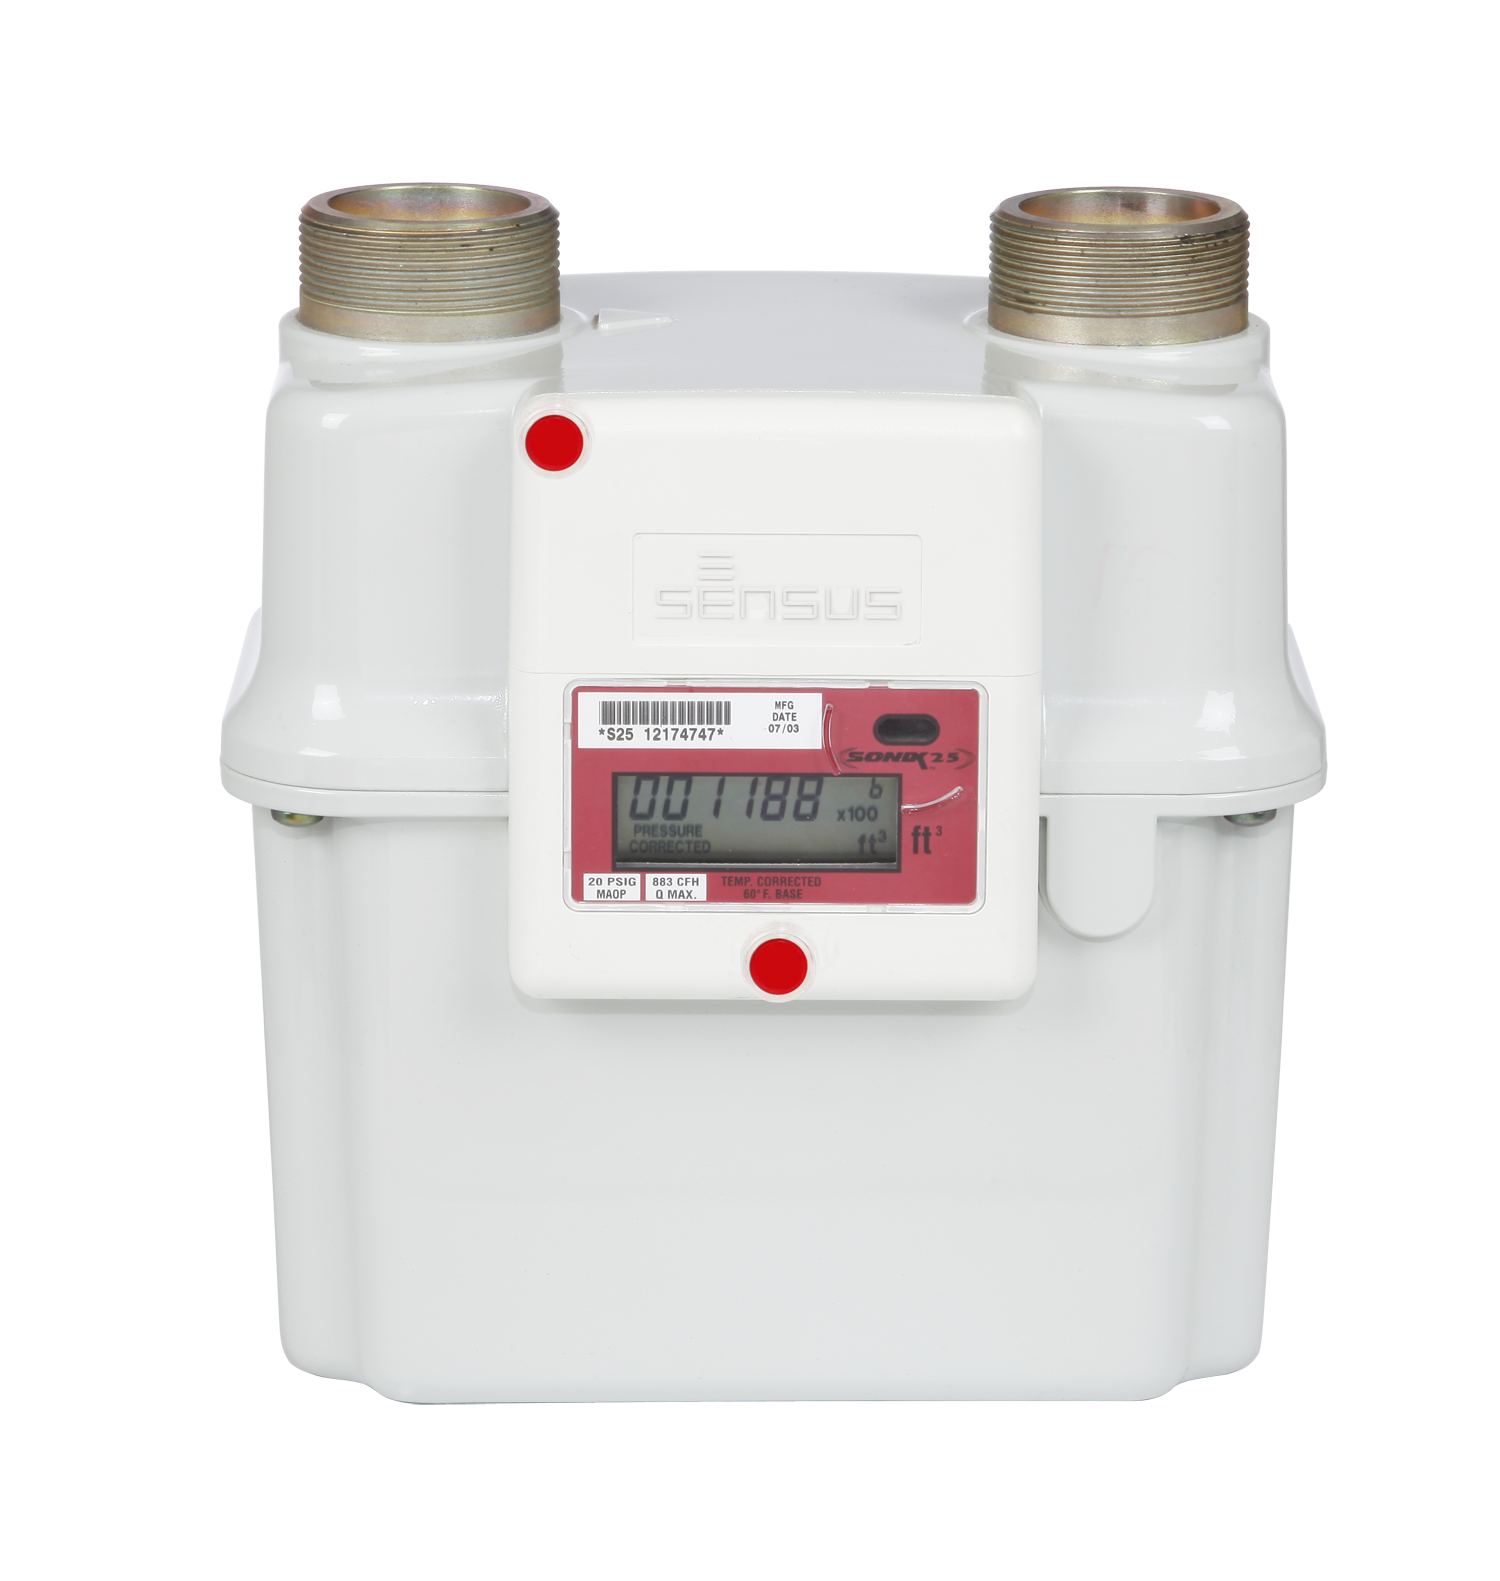 White Sensus ultrasonic natural gas meter with digital readout showing usage in cubic feet, pressure indication, and temperature compensation feature.